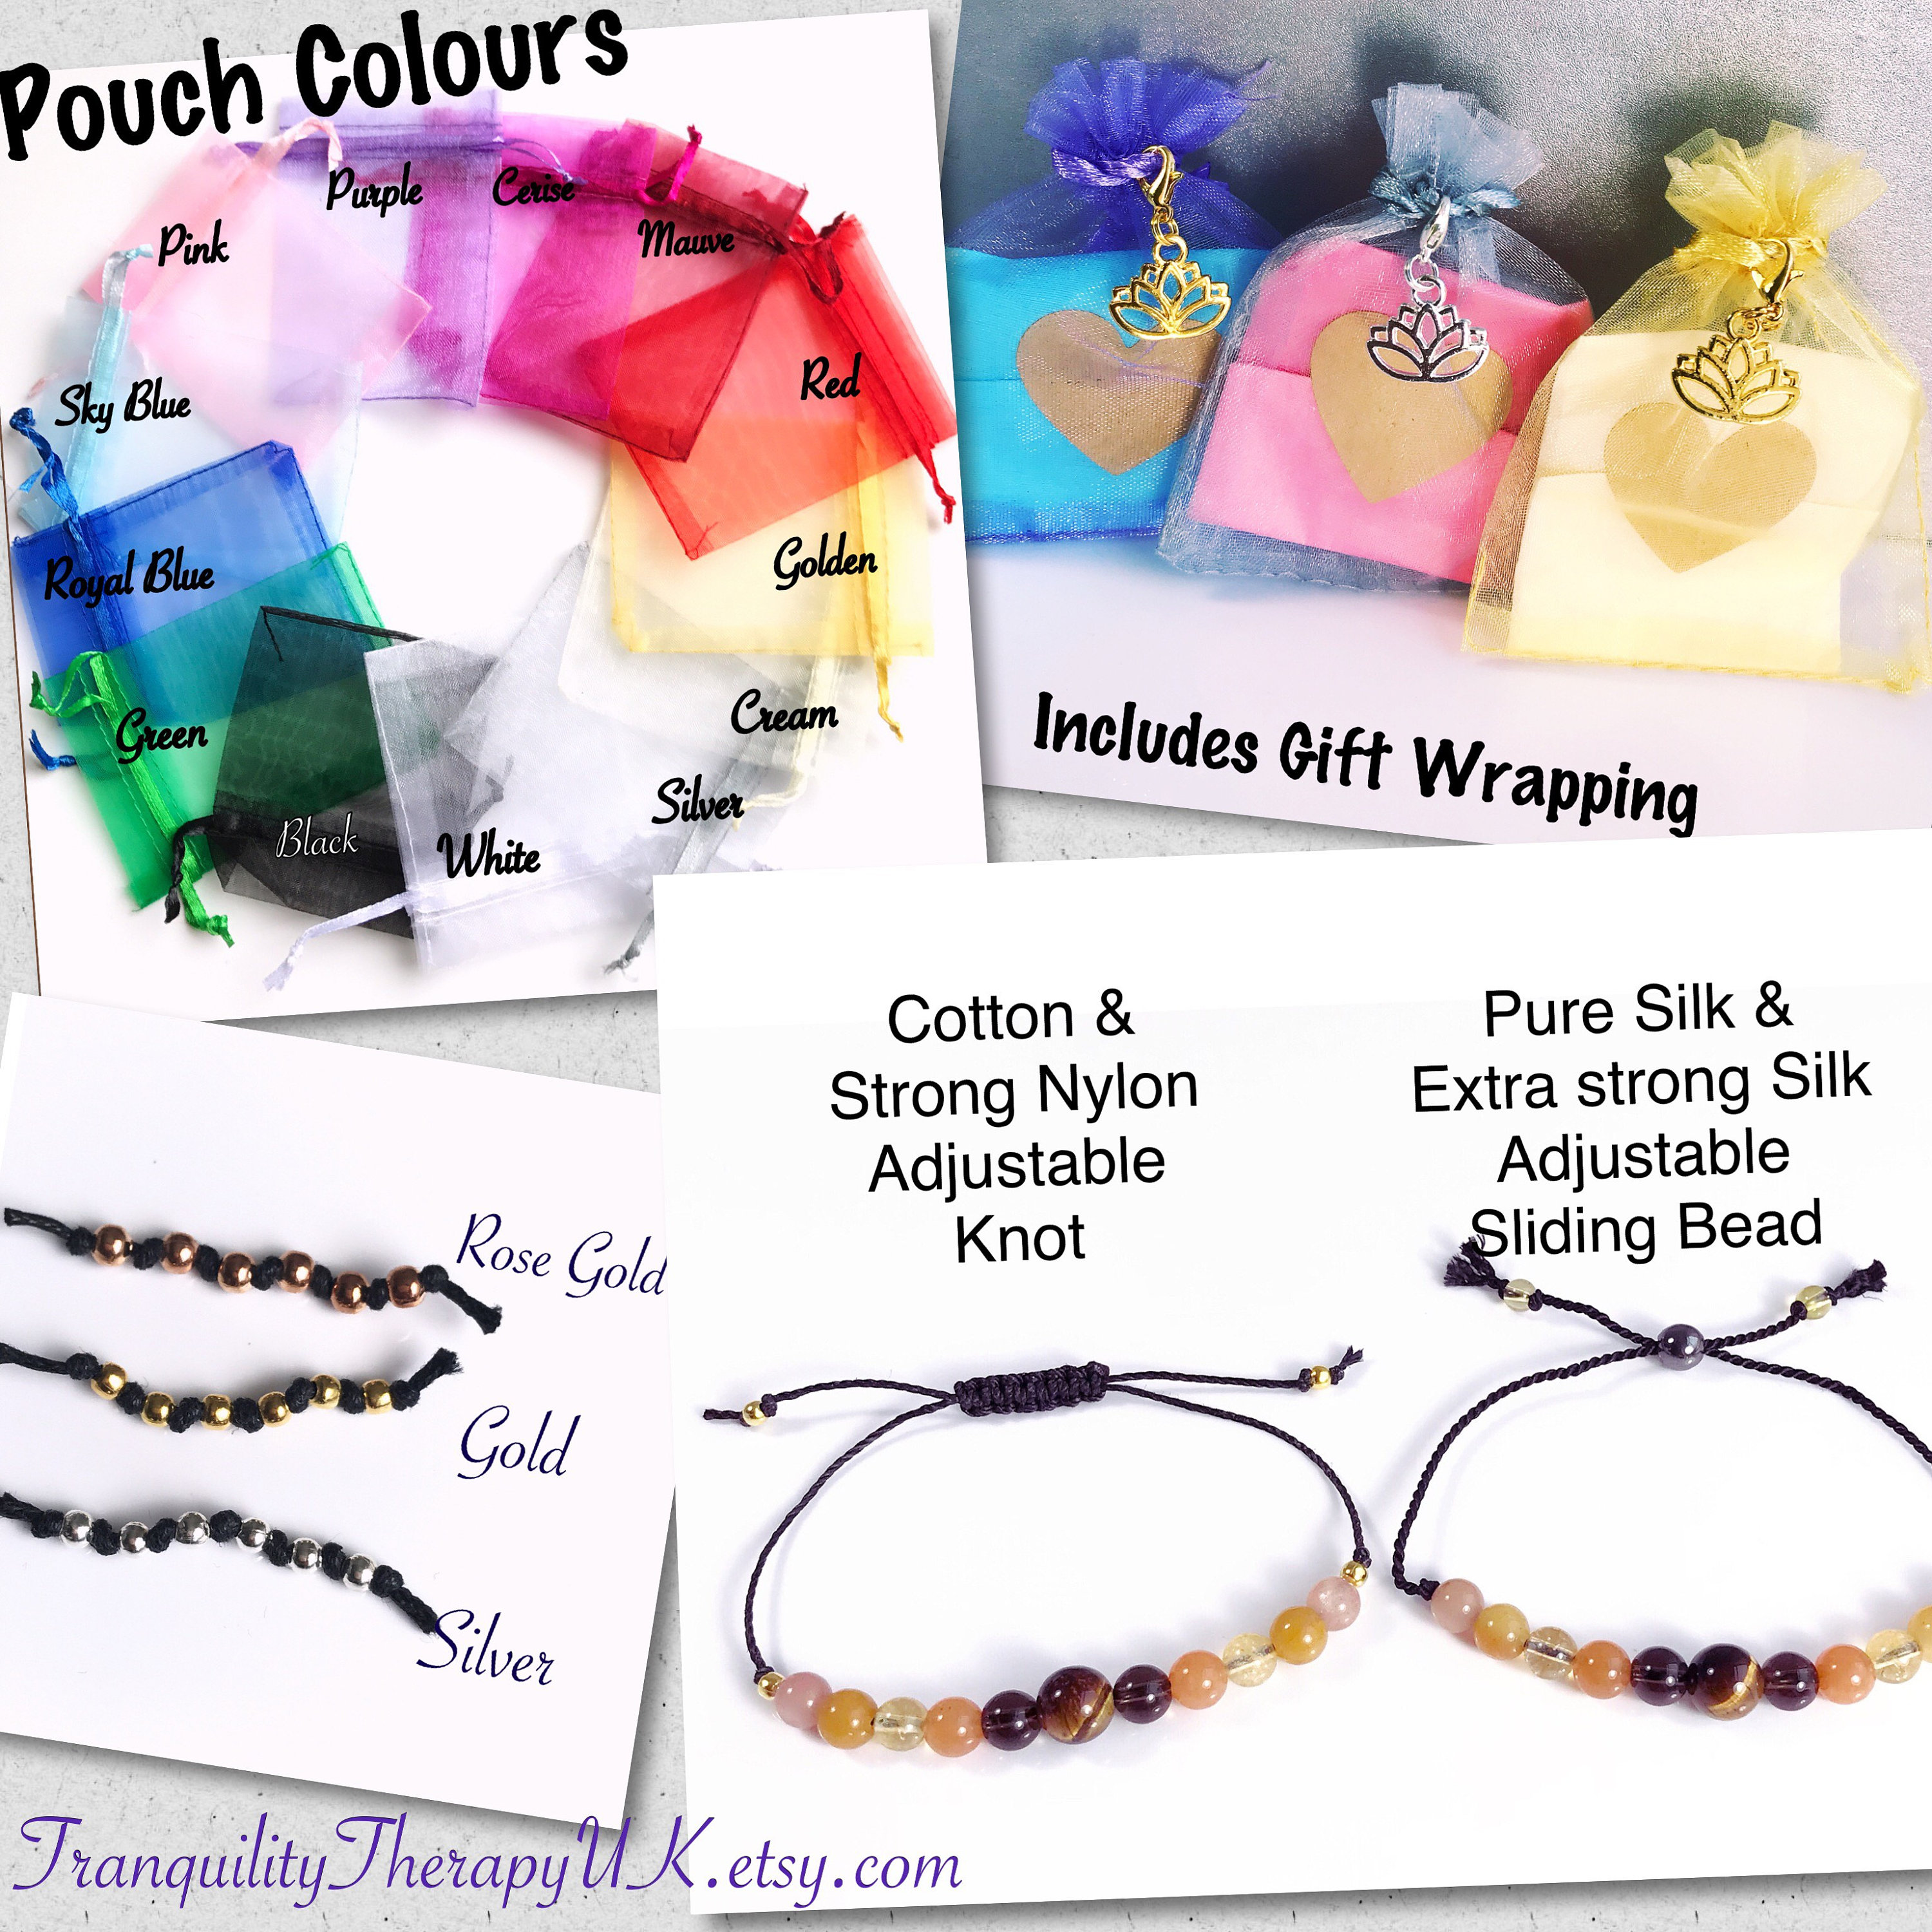 Amazon.com: Capricorn Zodiac Crystal Bracelet - Handmade Capricorn Gifts  from 7 Natural Healing Crystals, Adjustable Waterproof Braided String,  Spiritual Beads - Crafted Custom & Plus Size Jewelry from PusSoul :  Handmade Products